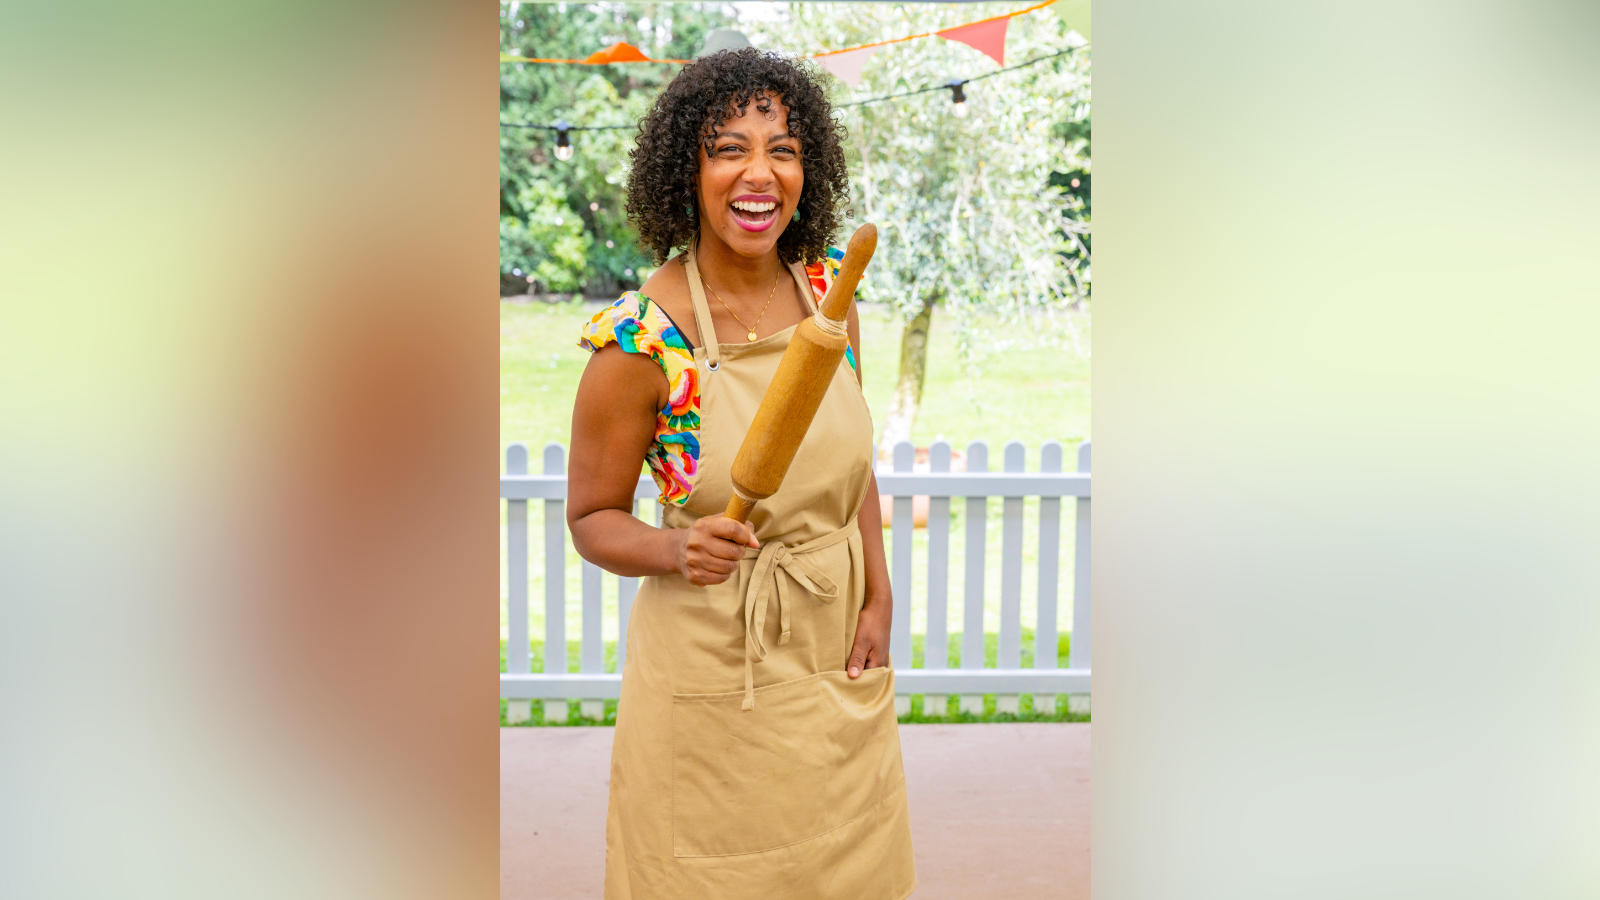 Philly baker rolls out her skills on newest season of 'The Great American Baking Show'